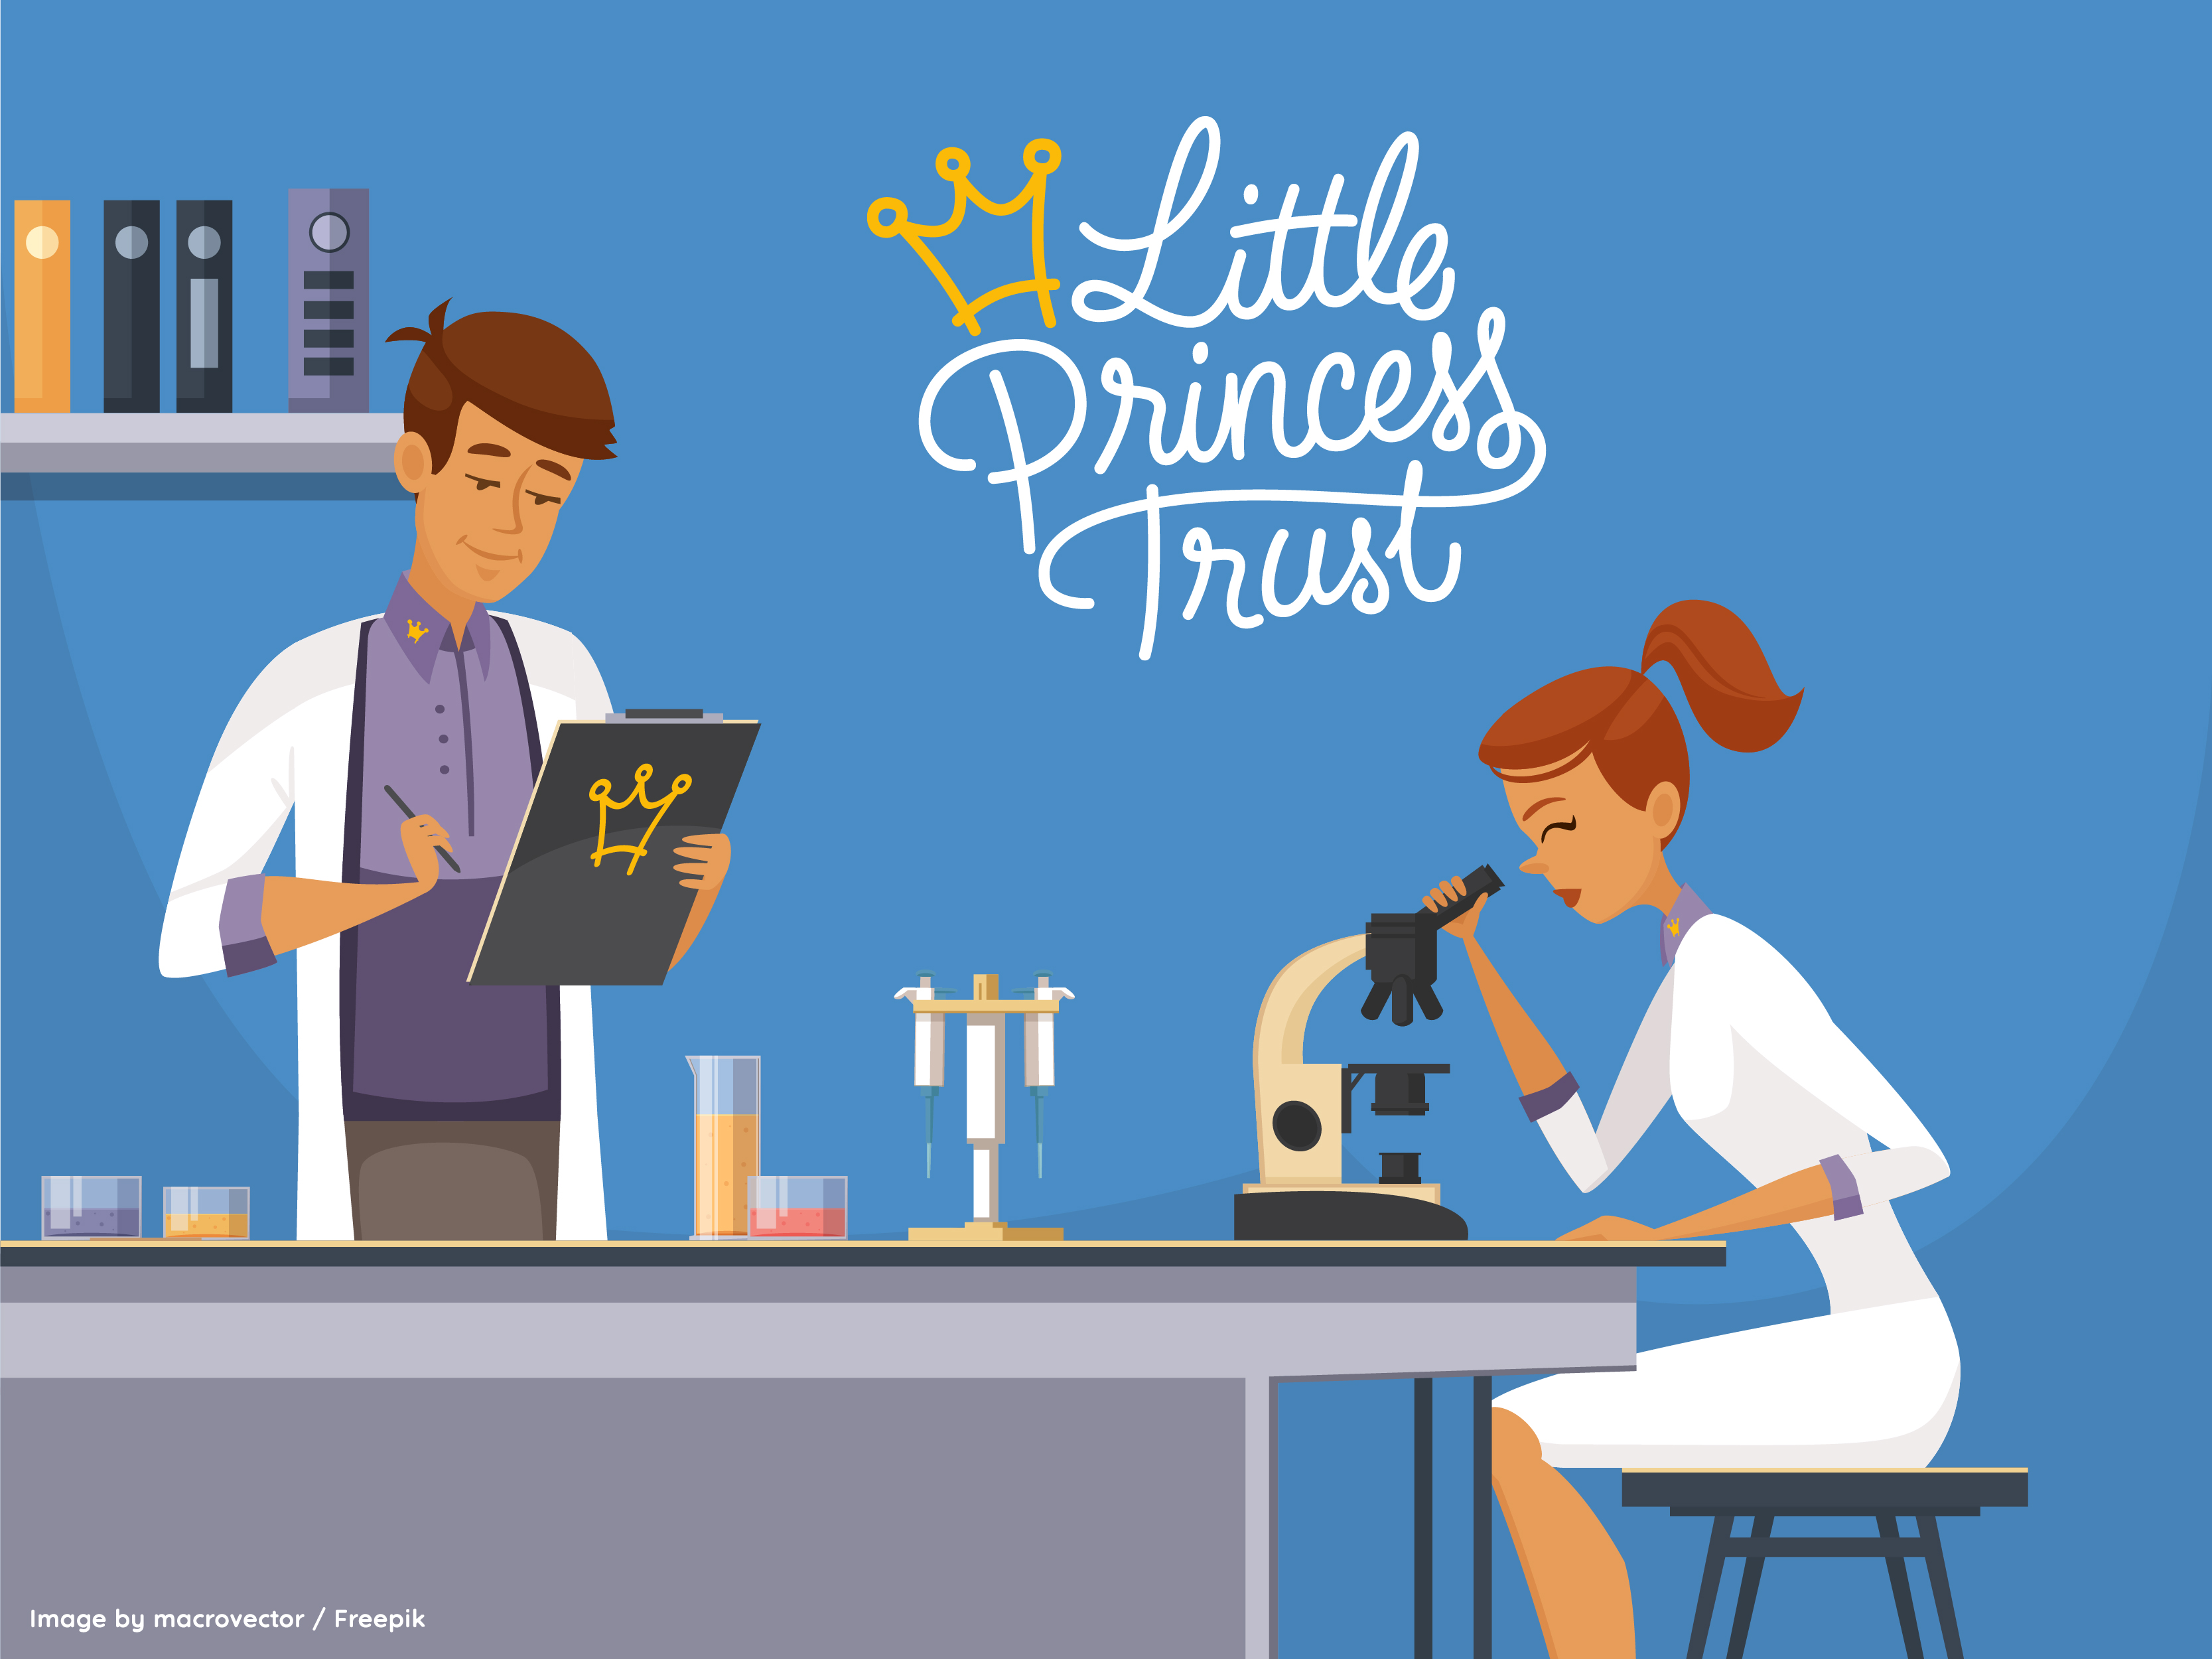 The Little Princess Trust is committed to funding childhood cancer research searching for kinder and more effective treatments.